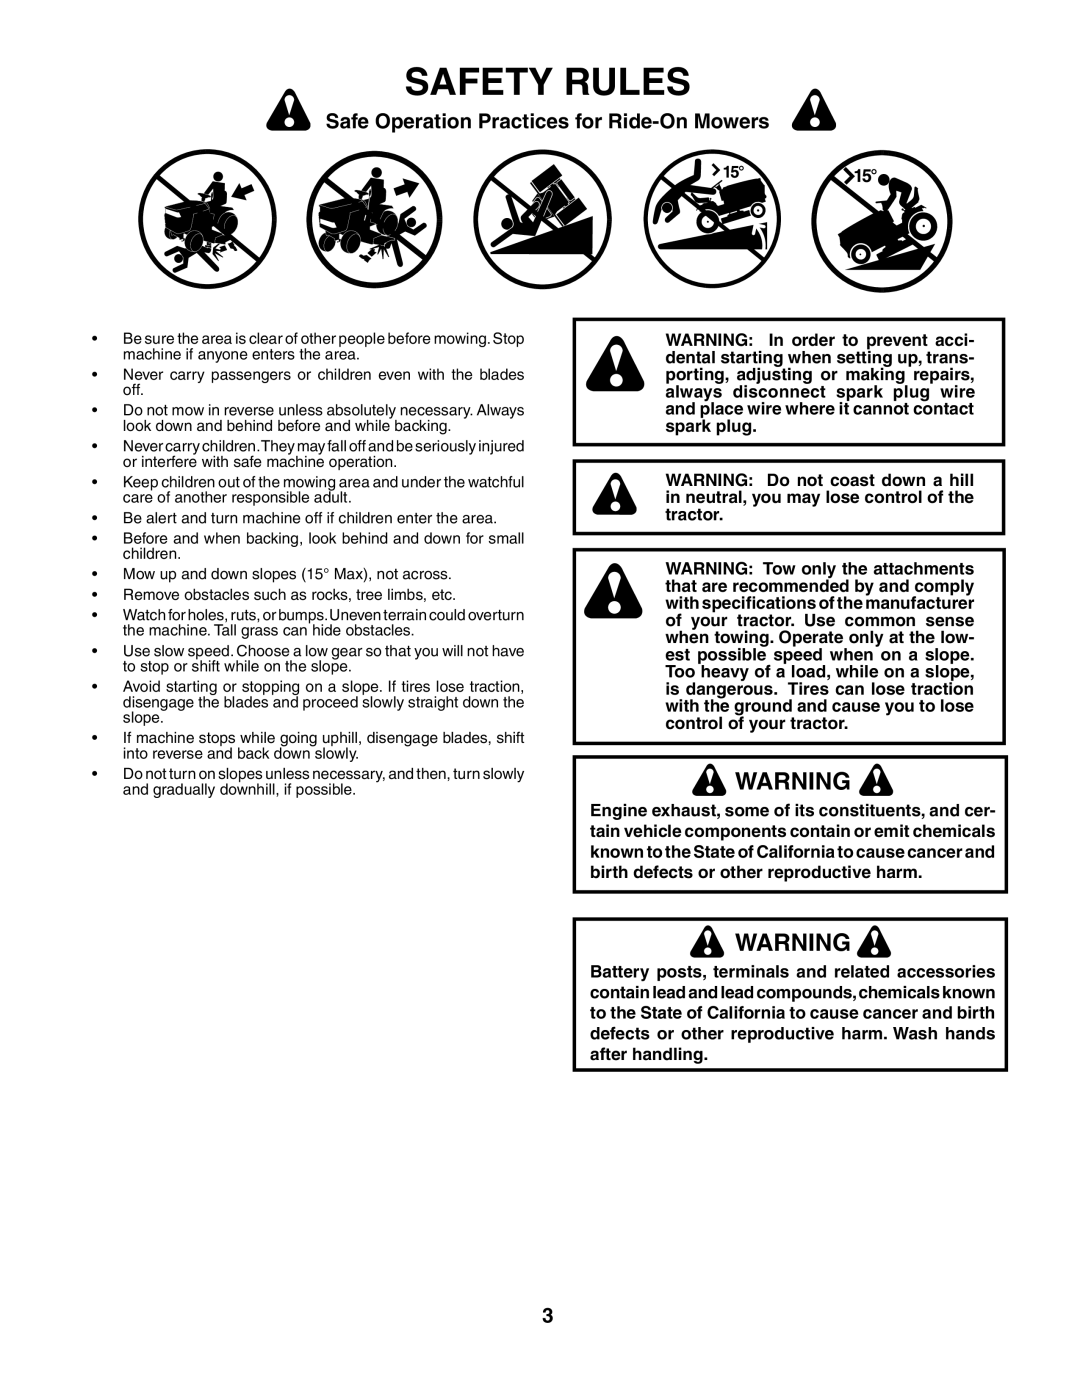 Husqvarna YTH2248 owner manual Safety Rules, Safe Operation Practices for Ride-On Mowers, 7!2.. NN ORDERE TO PREVENT ACCI 